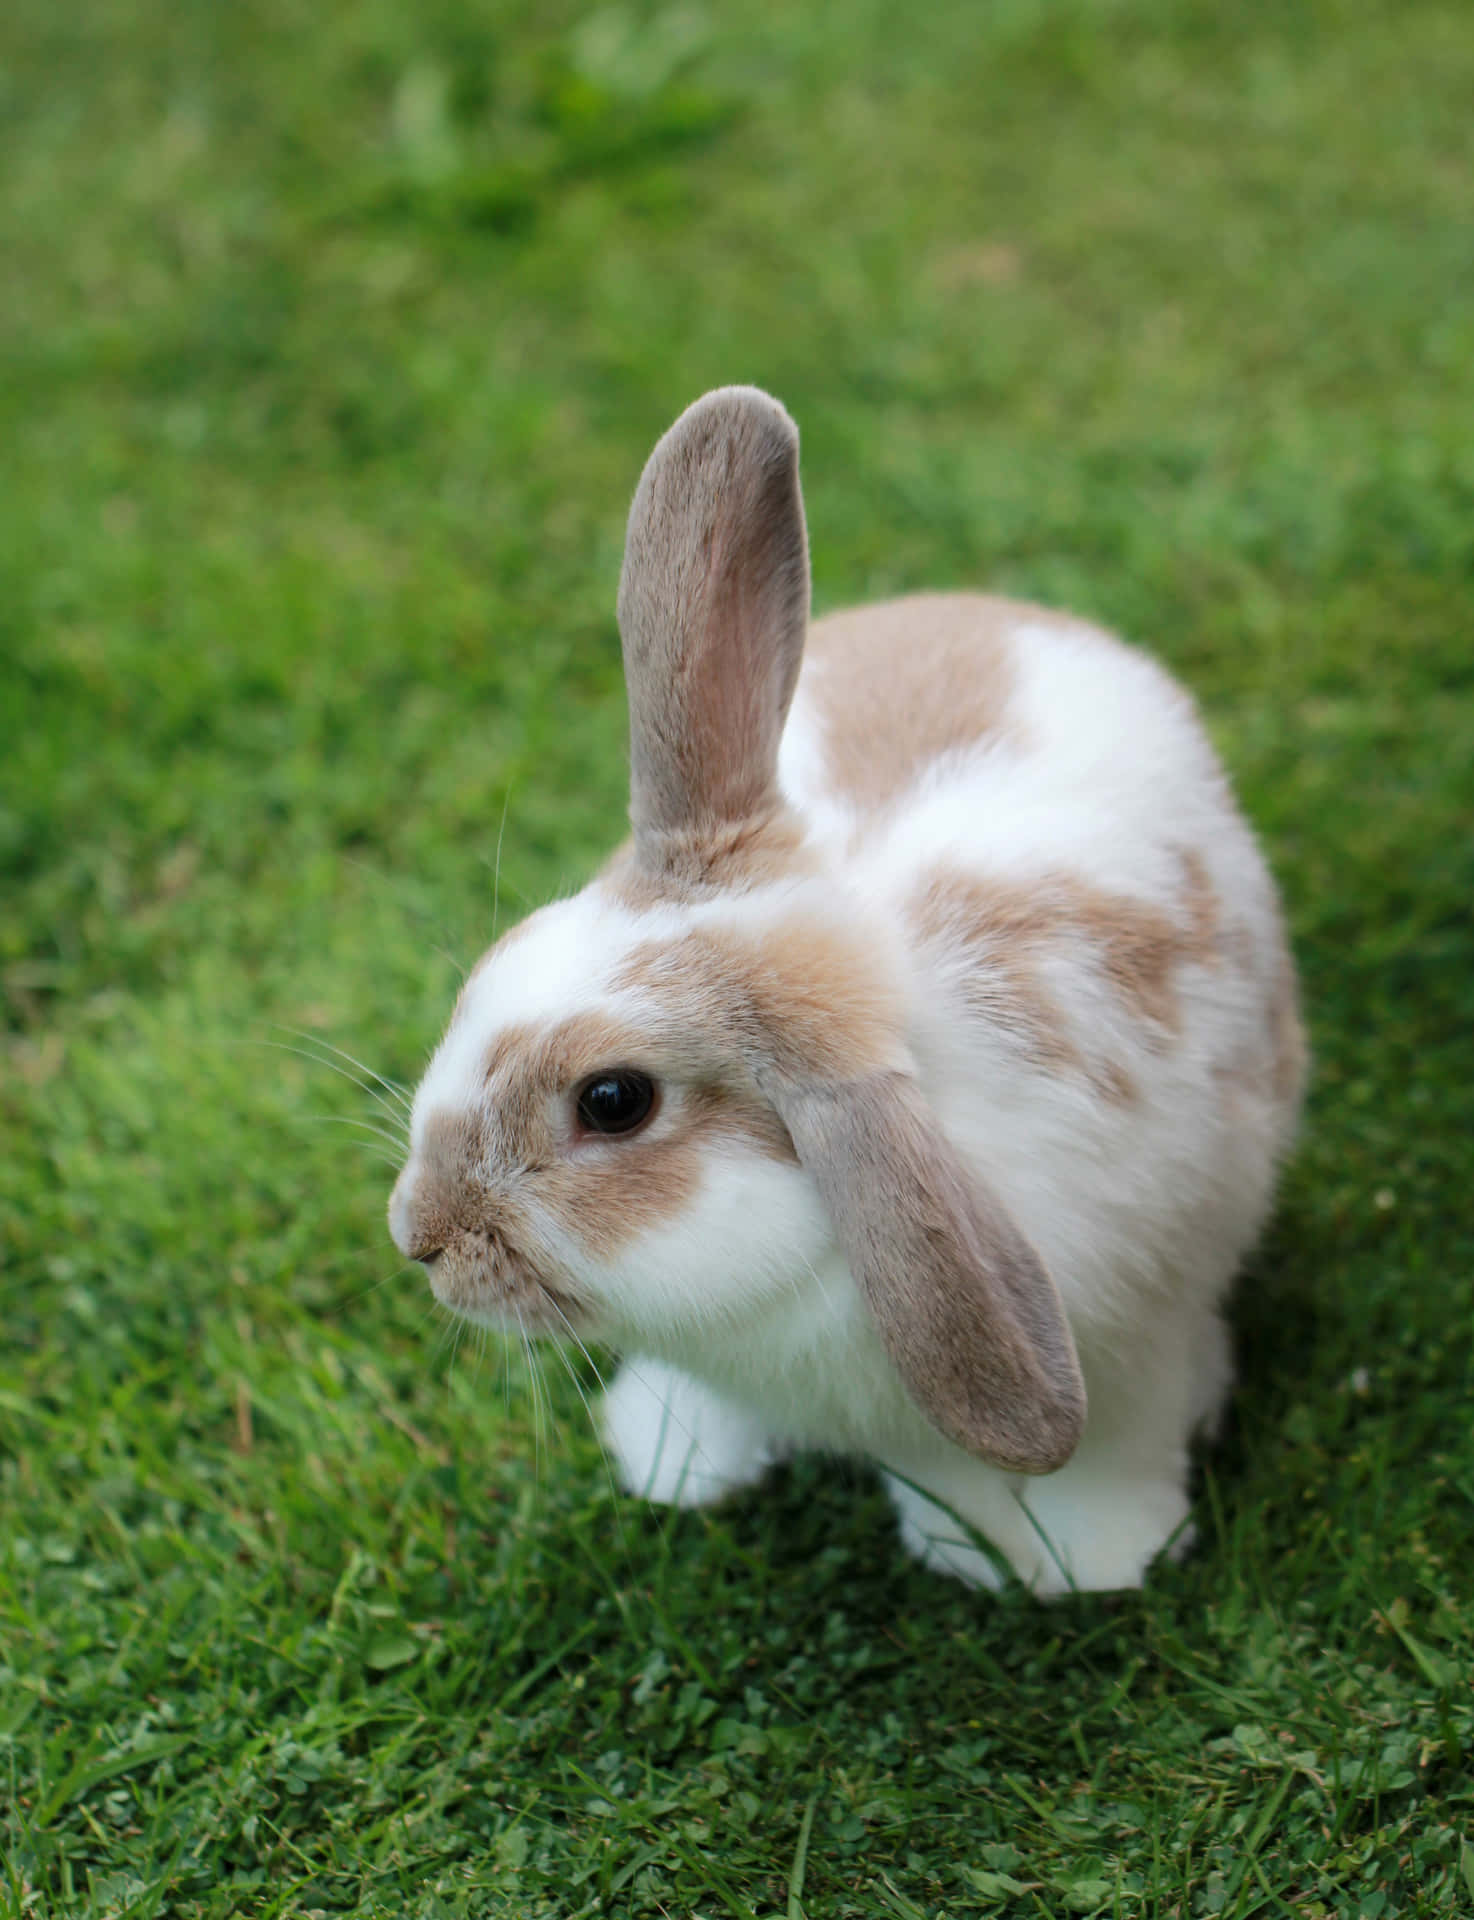 Cute Rabbit On Grass Pictures